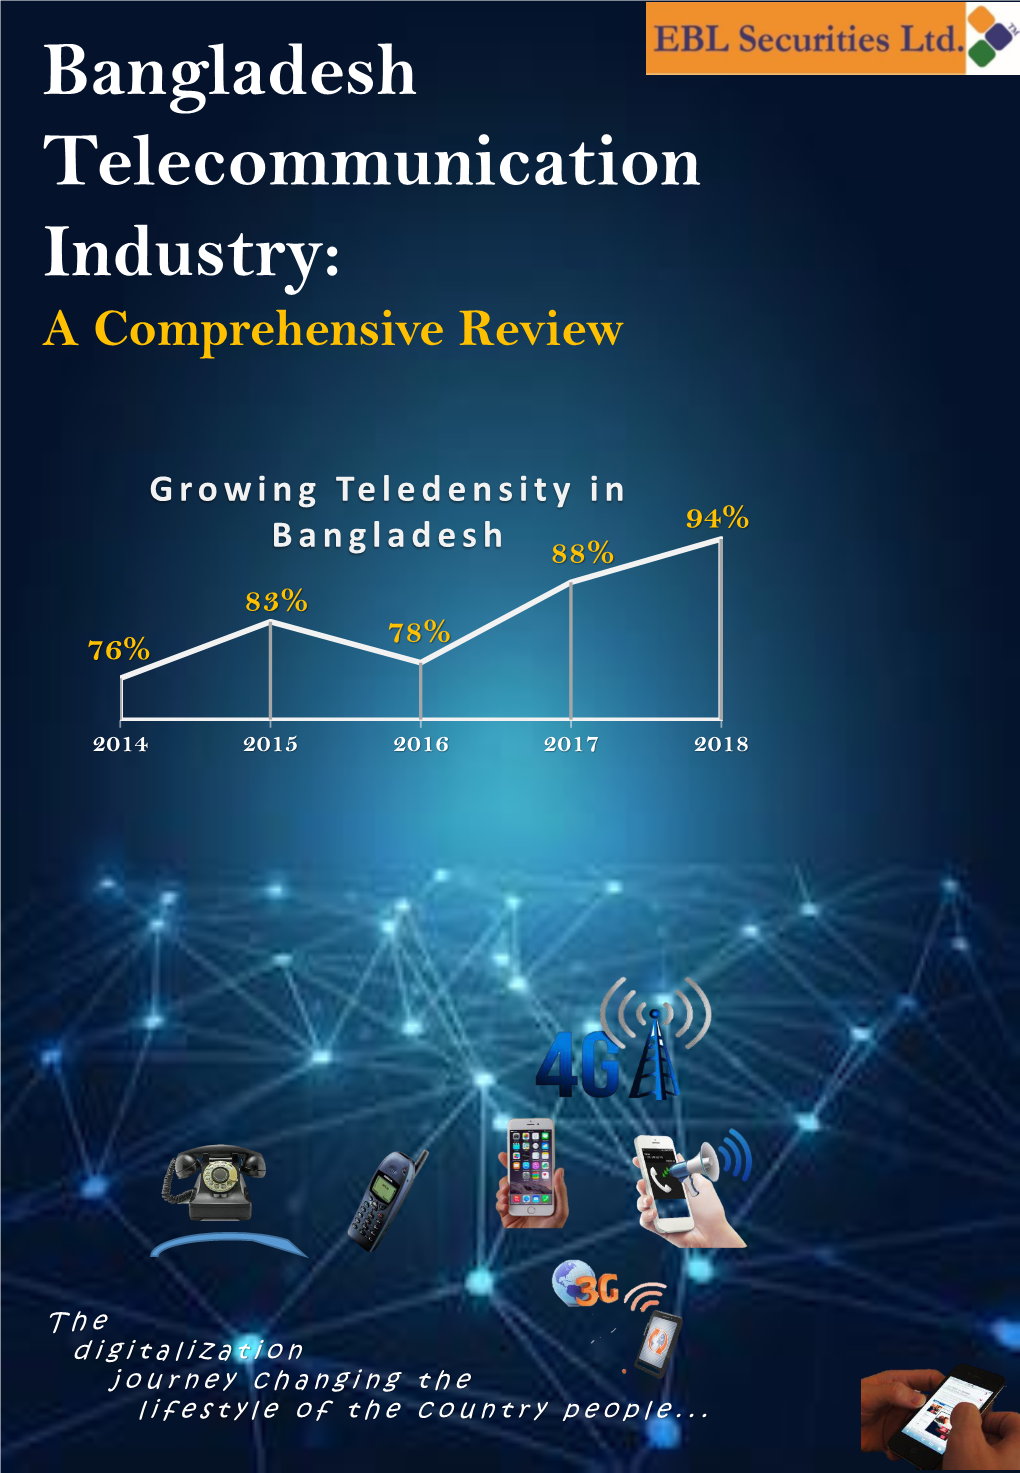 Bangladesh Telecommunication Industry: a Comprehensive Review